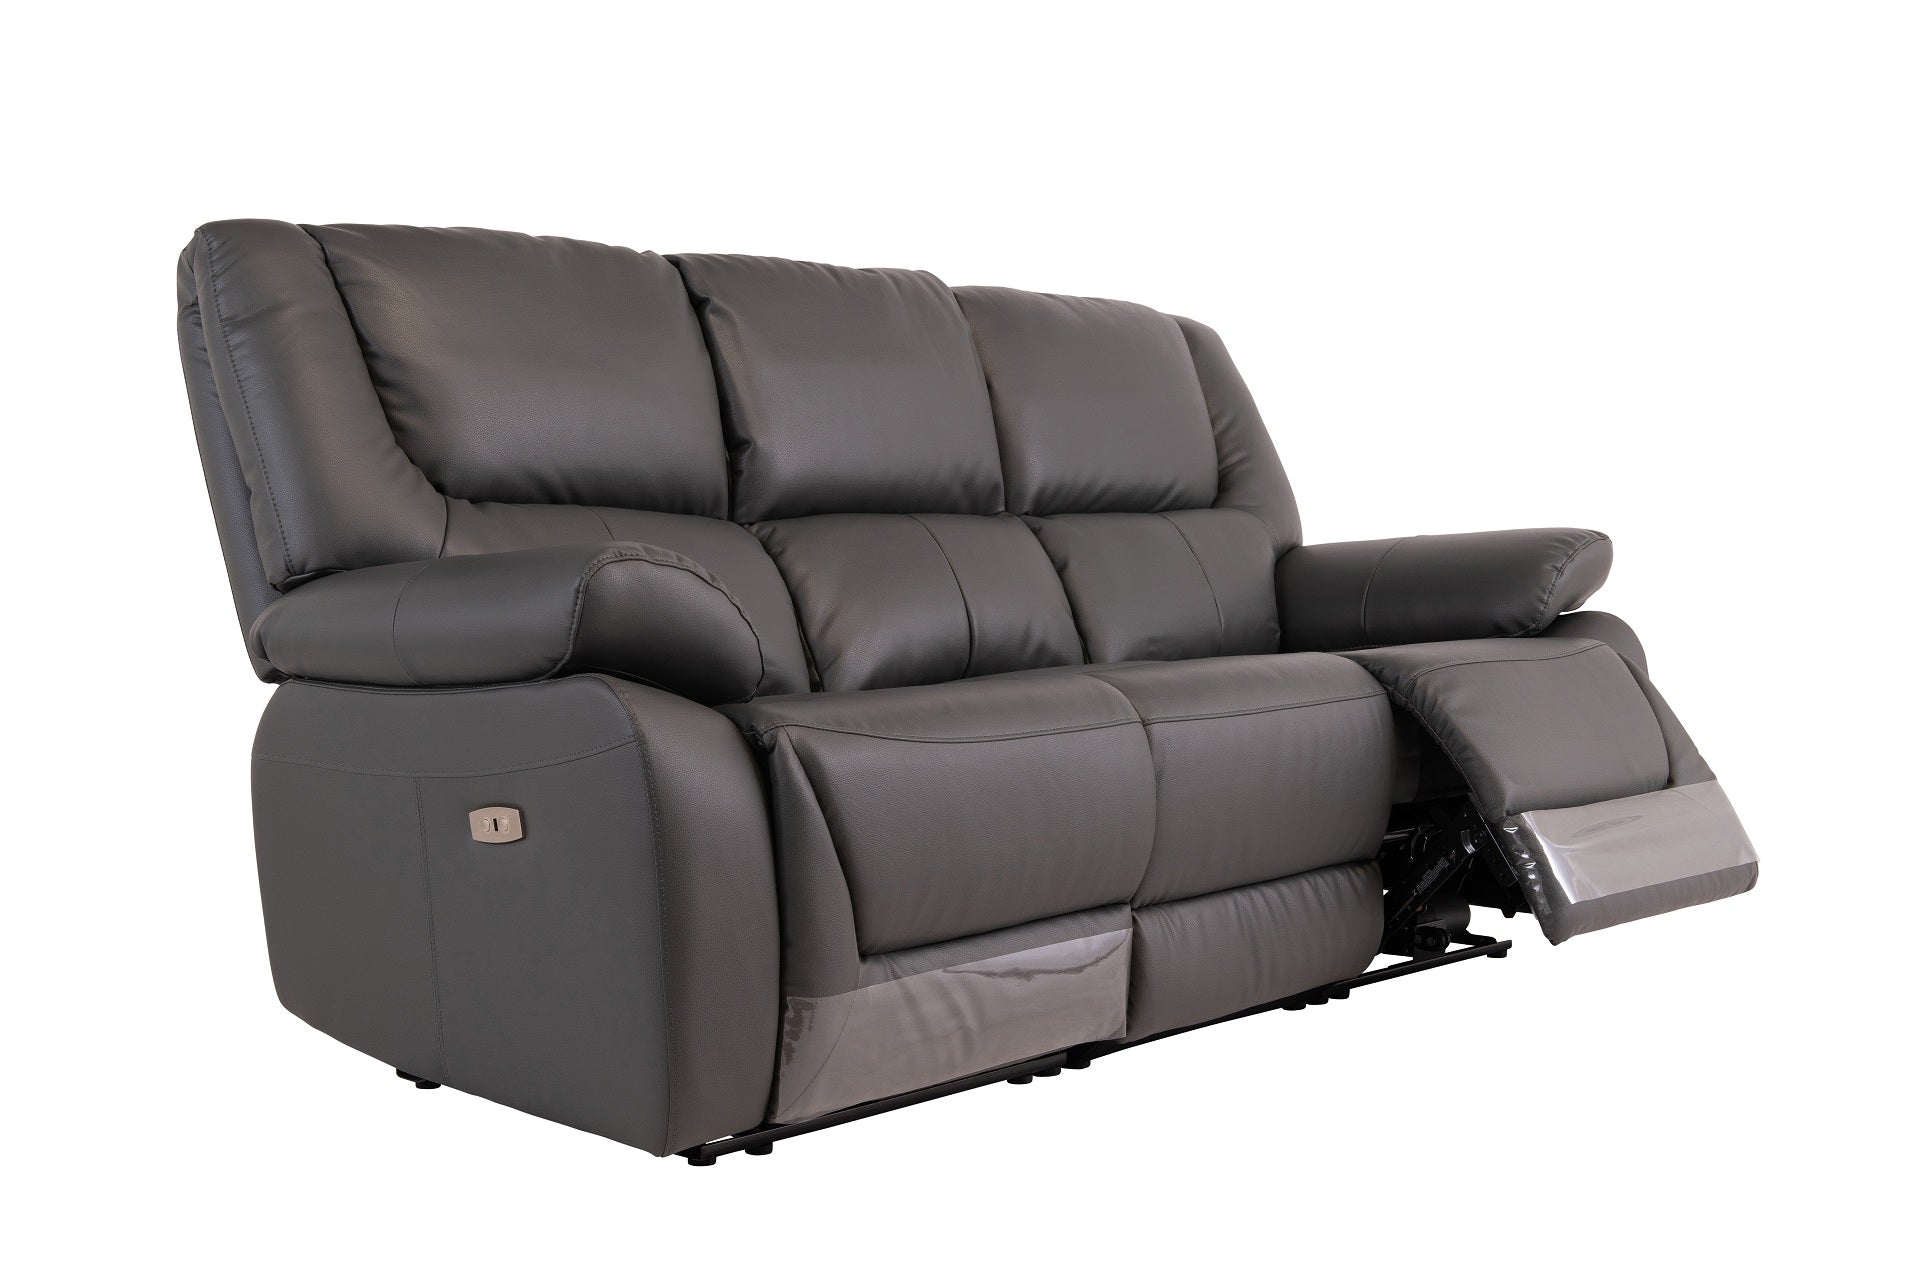 Darah Leather Electric 3 Seater Recliner - Charcoal